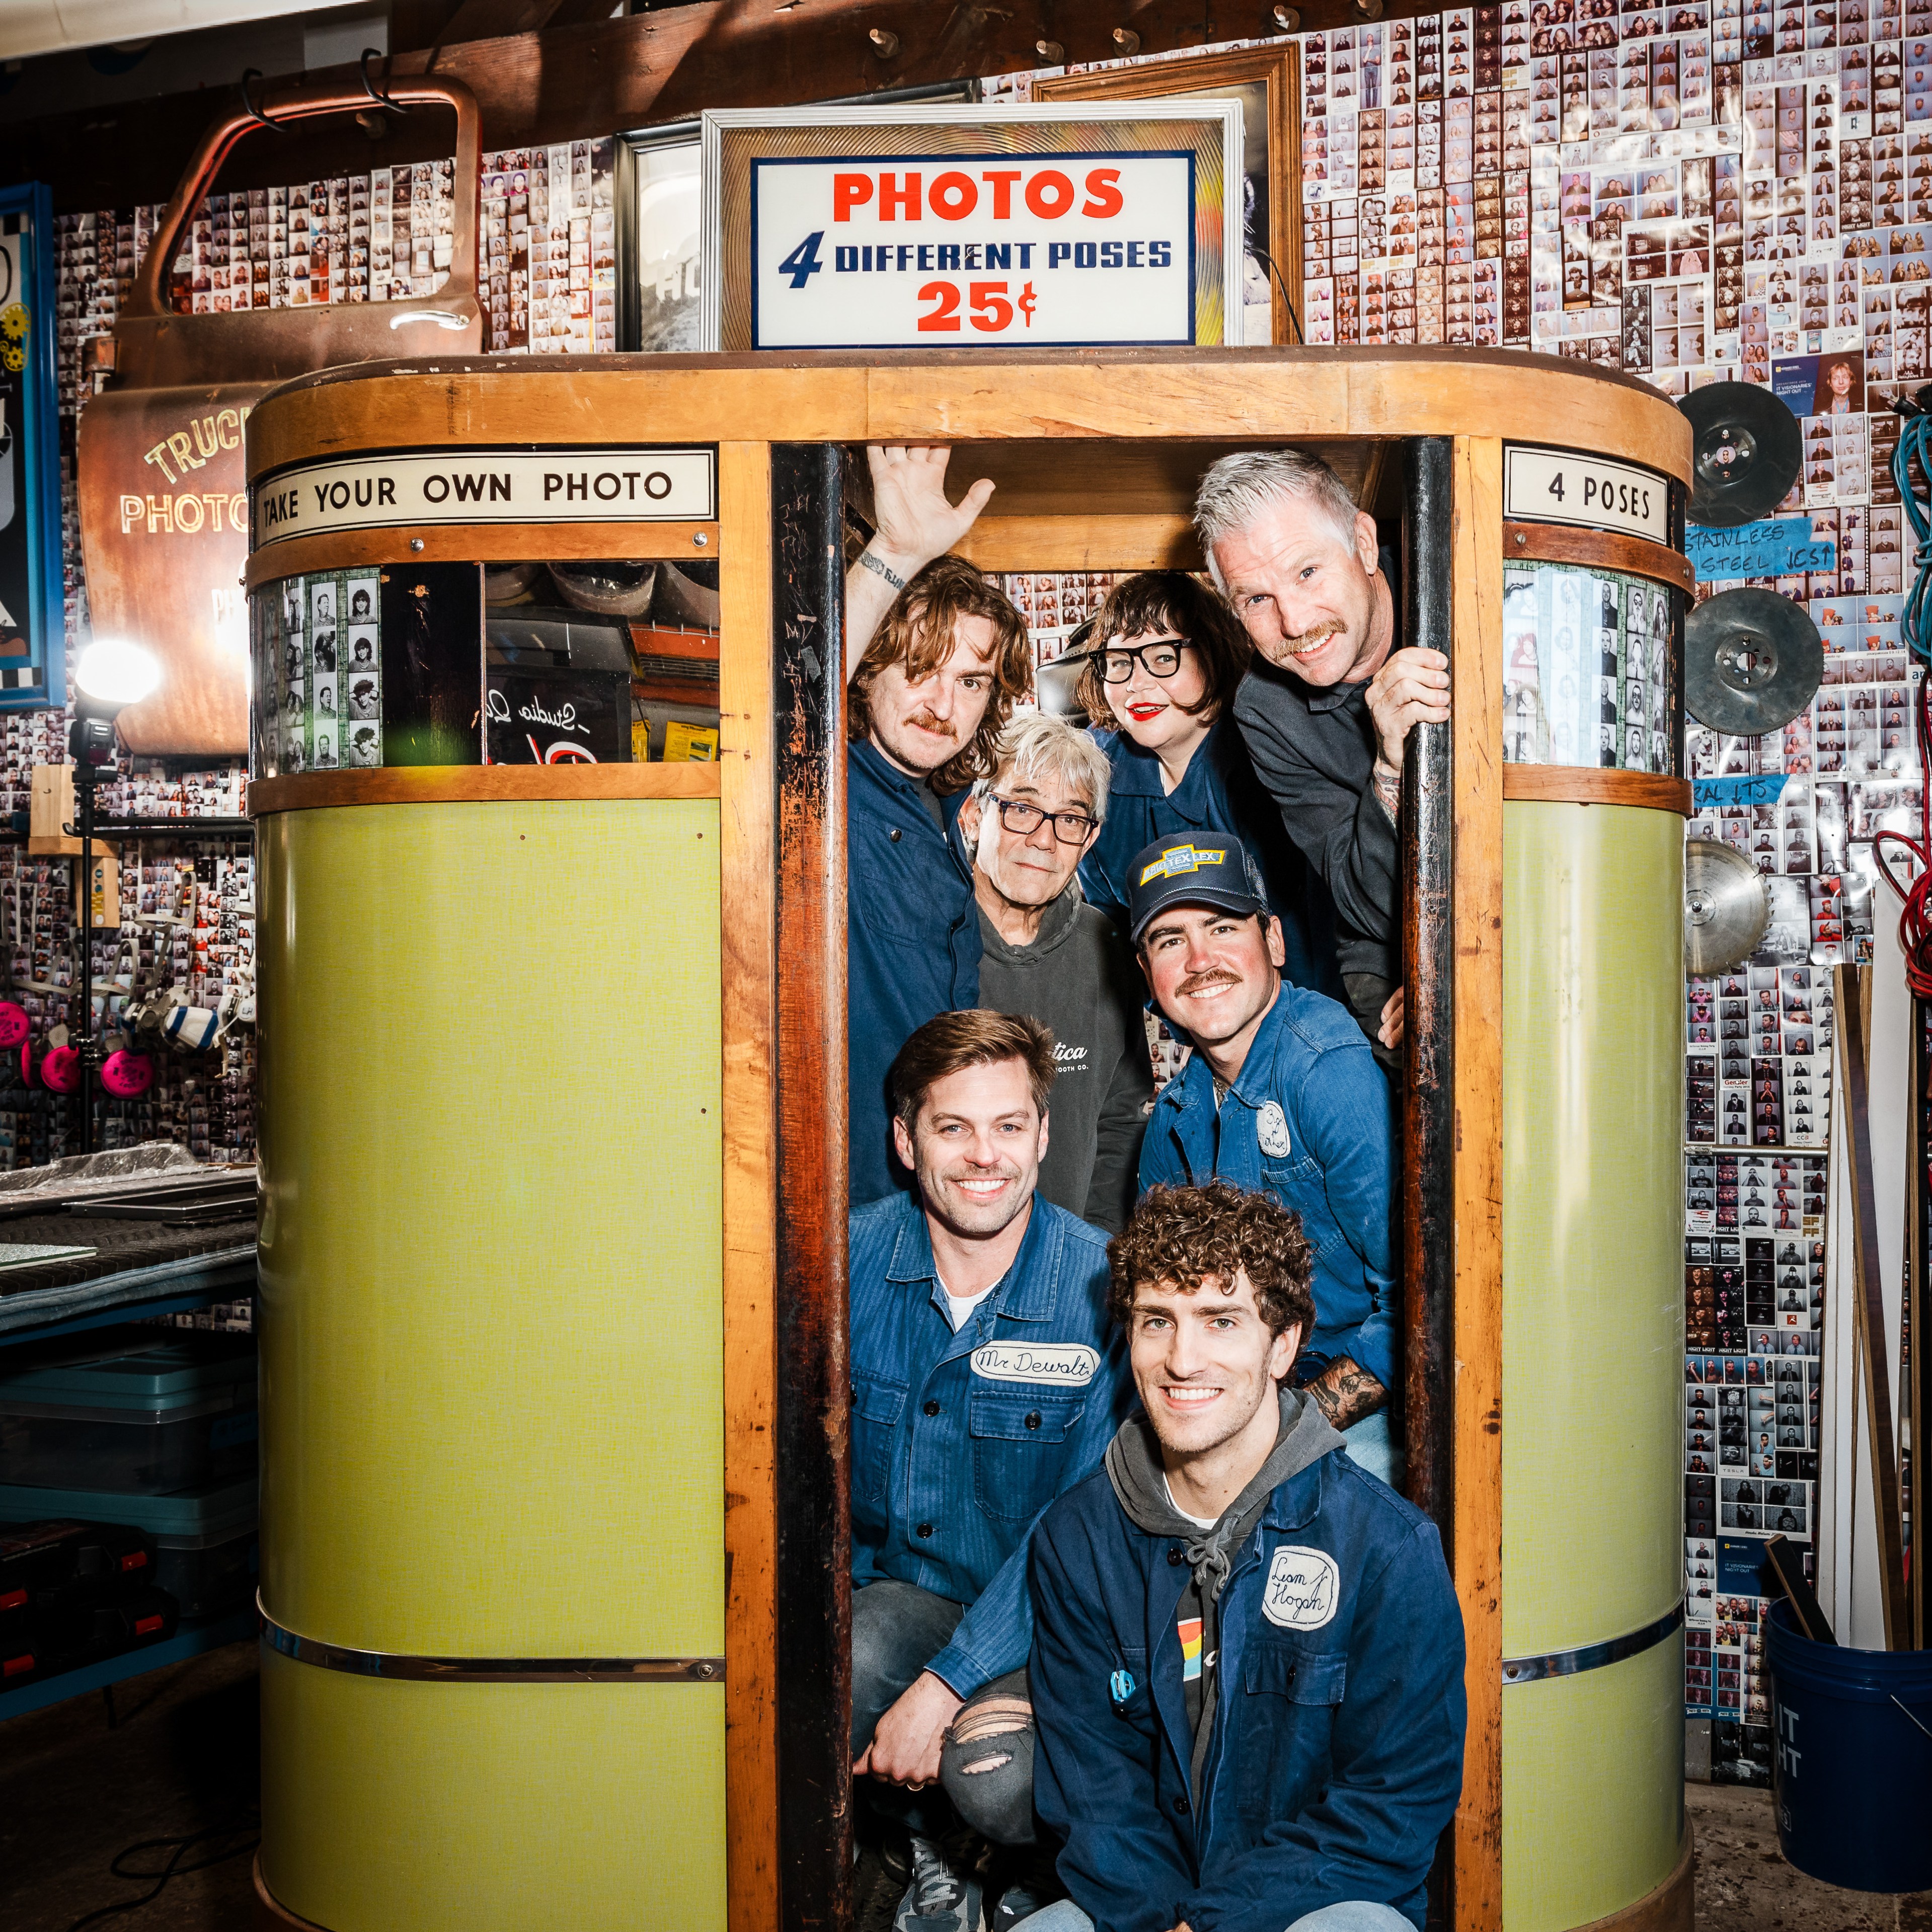 Seven people are crowded in an old-fashioned photo booth, smiling. The booth advertises “PHOTOS 4 DIFFERENT POSES 25¢.” Walls are filled with photo strips.